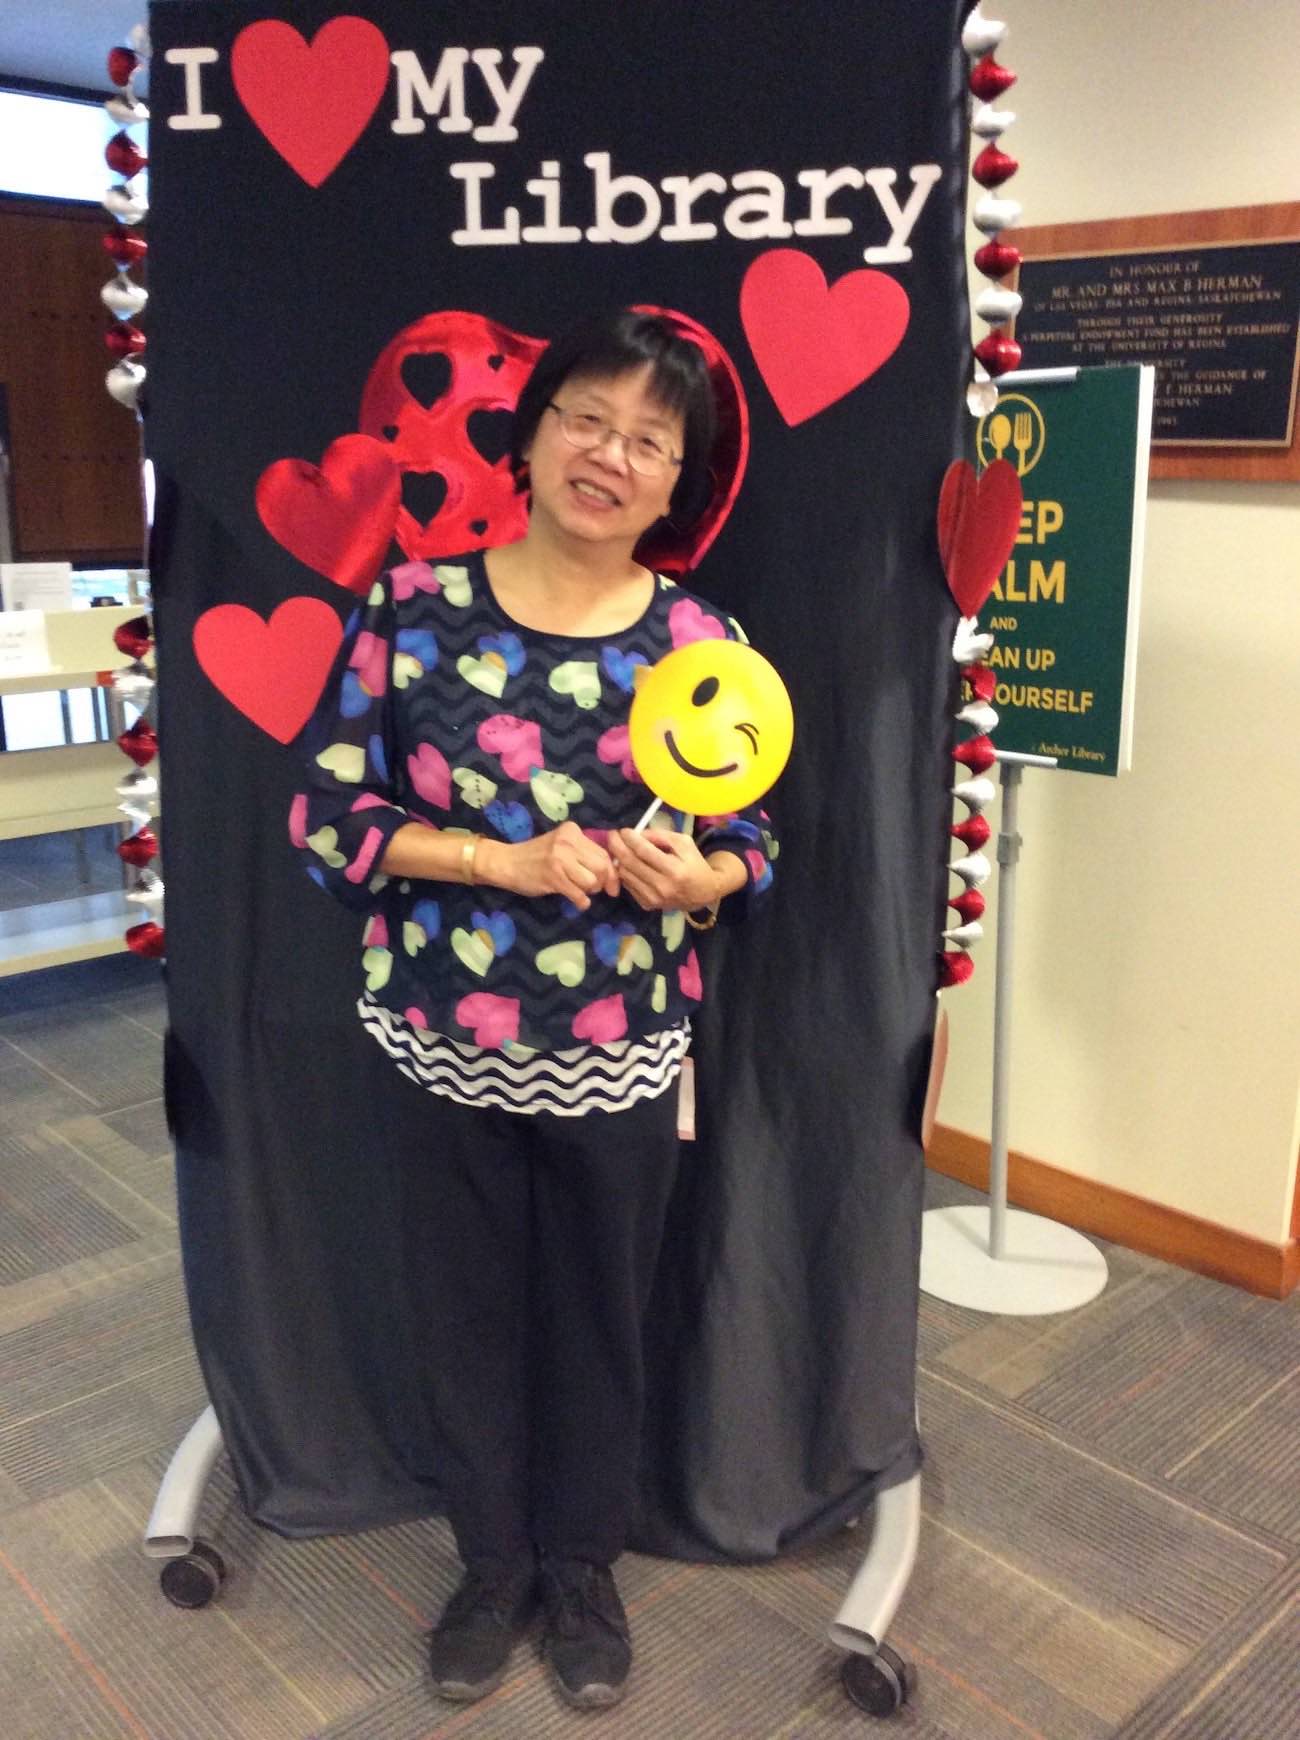 Archives staff member Kieu Ma stands in front of the I love my Library banner holding up a winking smiley face emoji on a stick and smiling